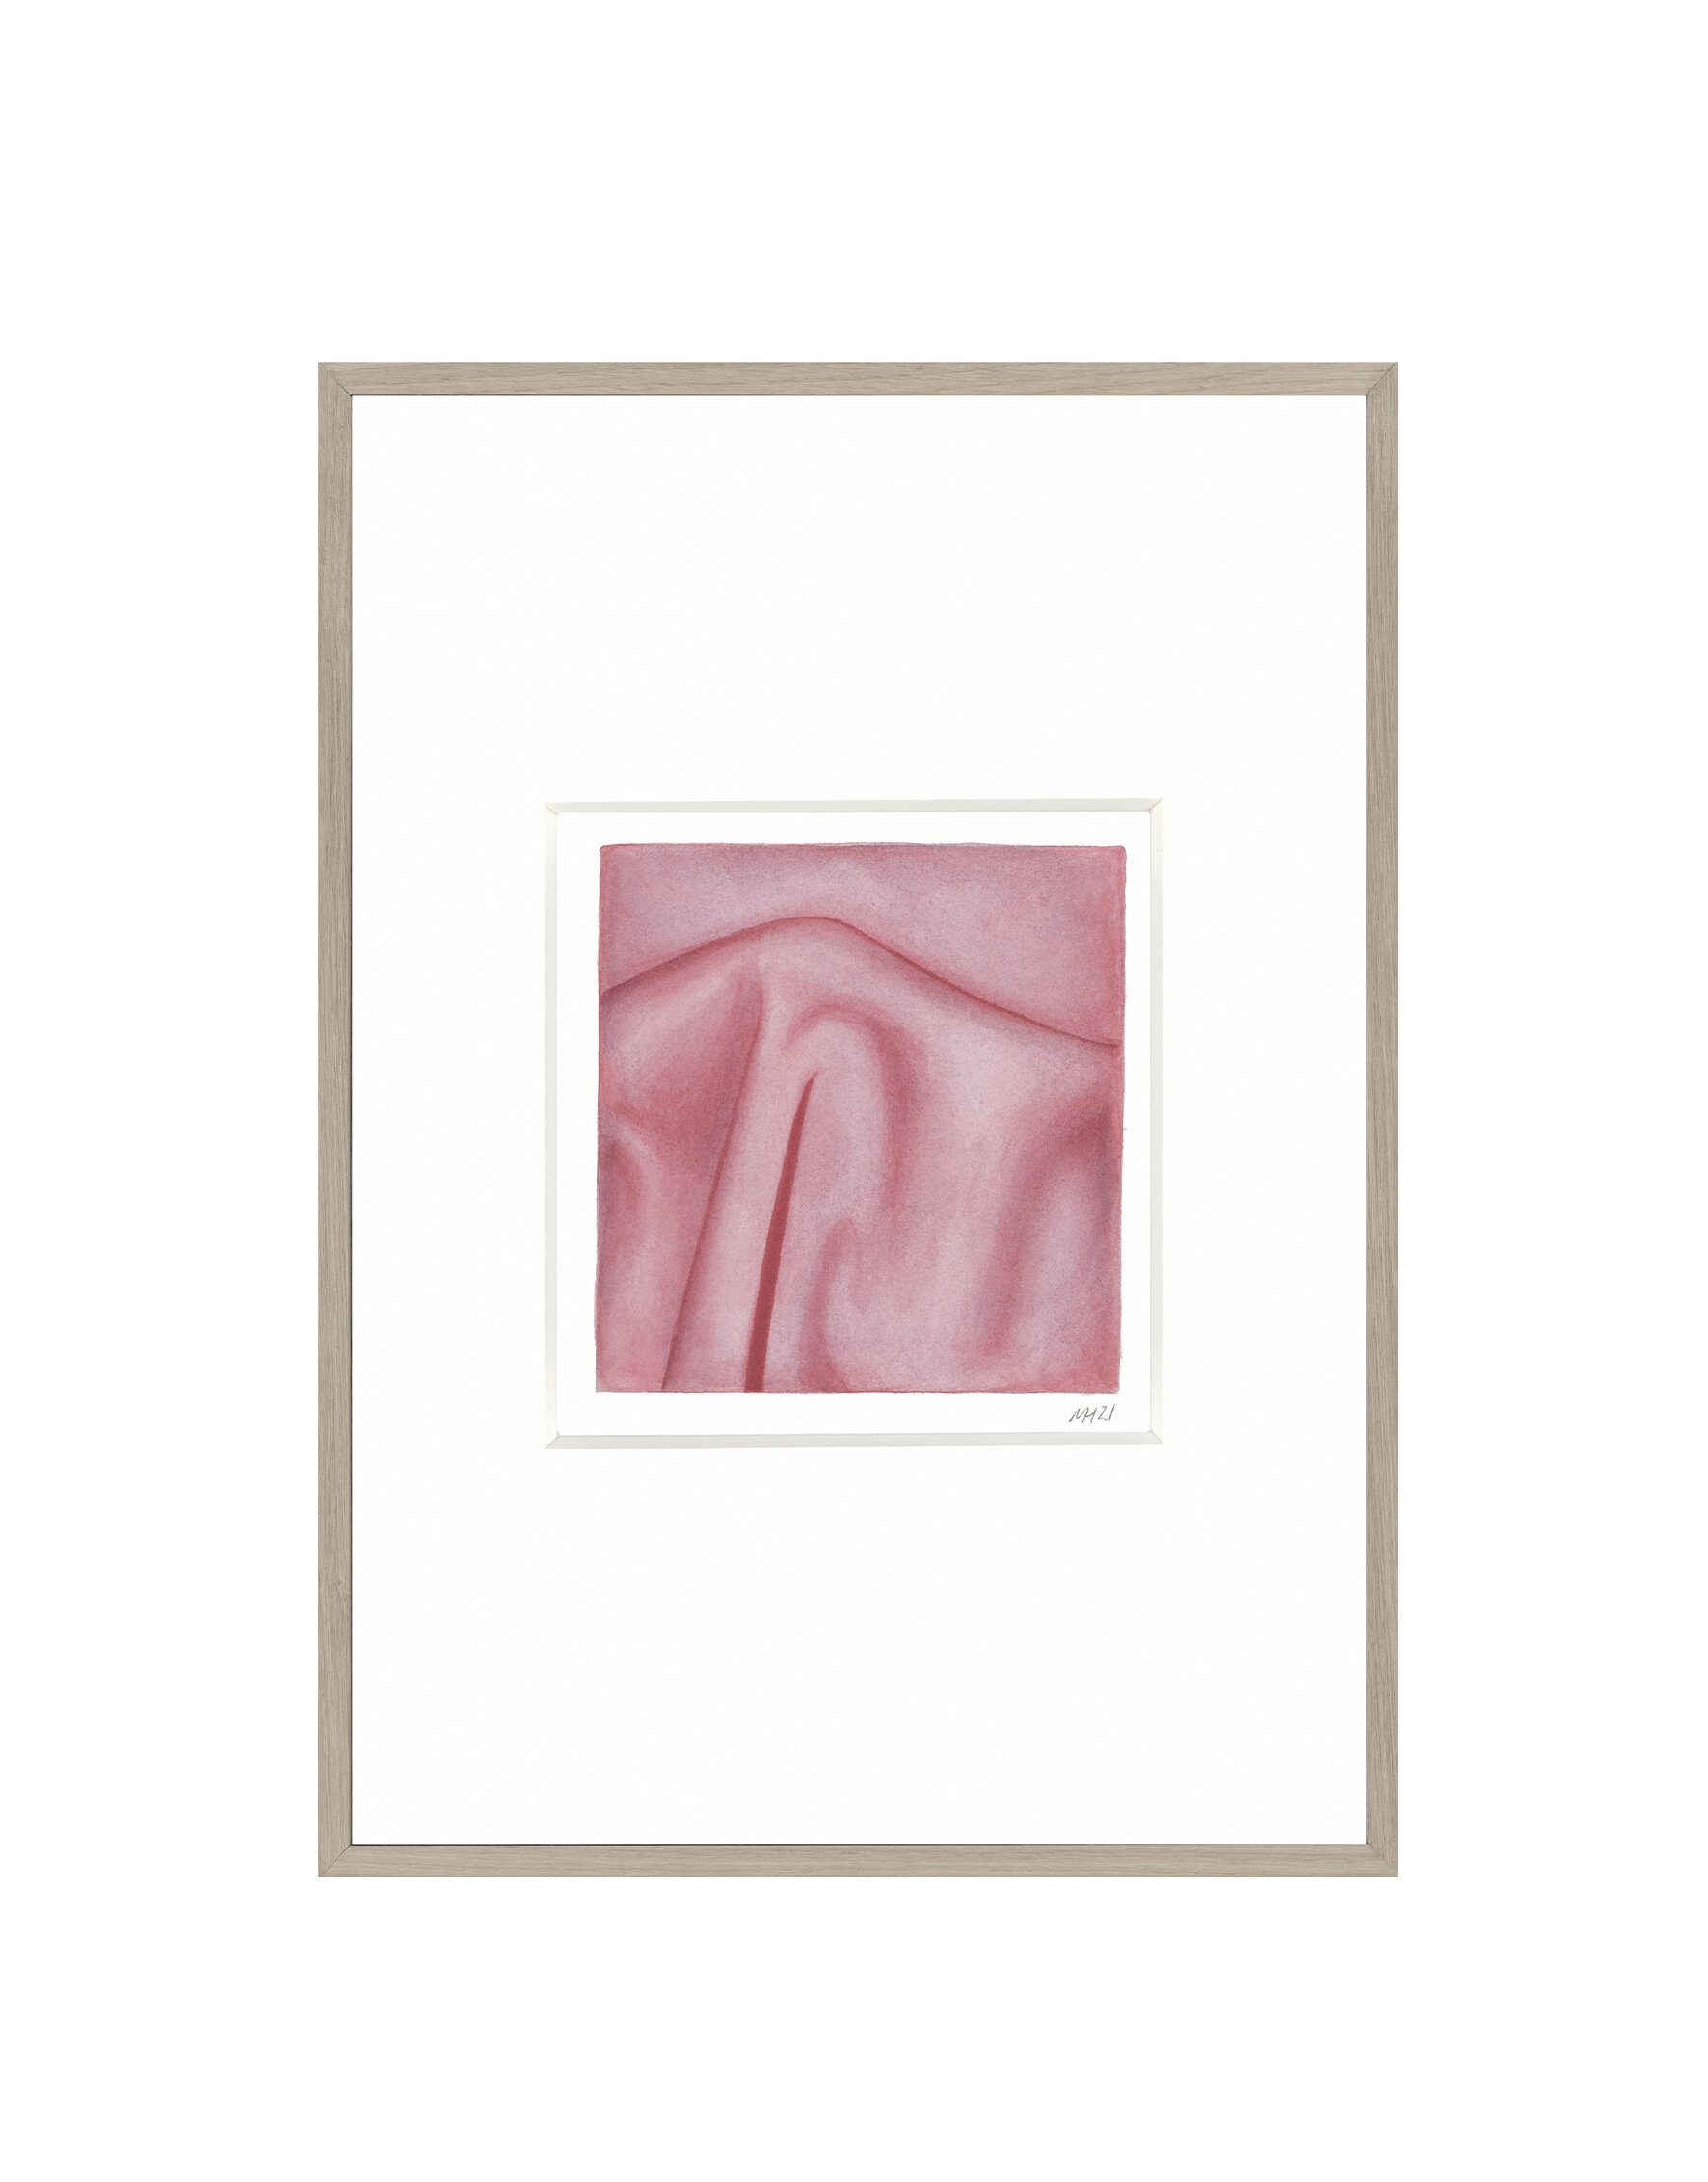 Title: Pink fabric